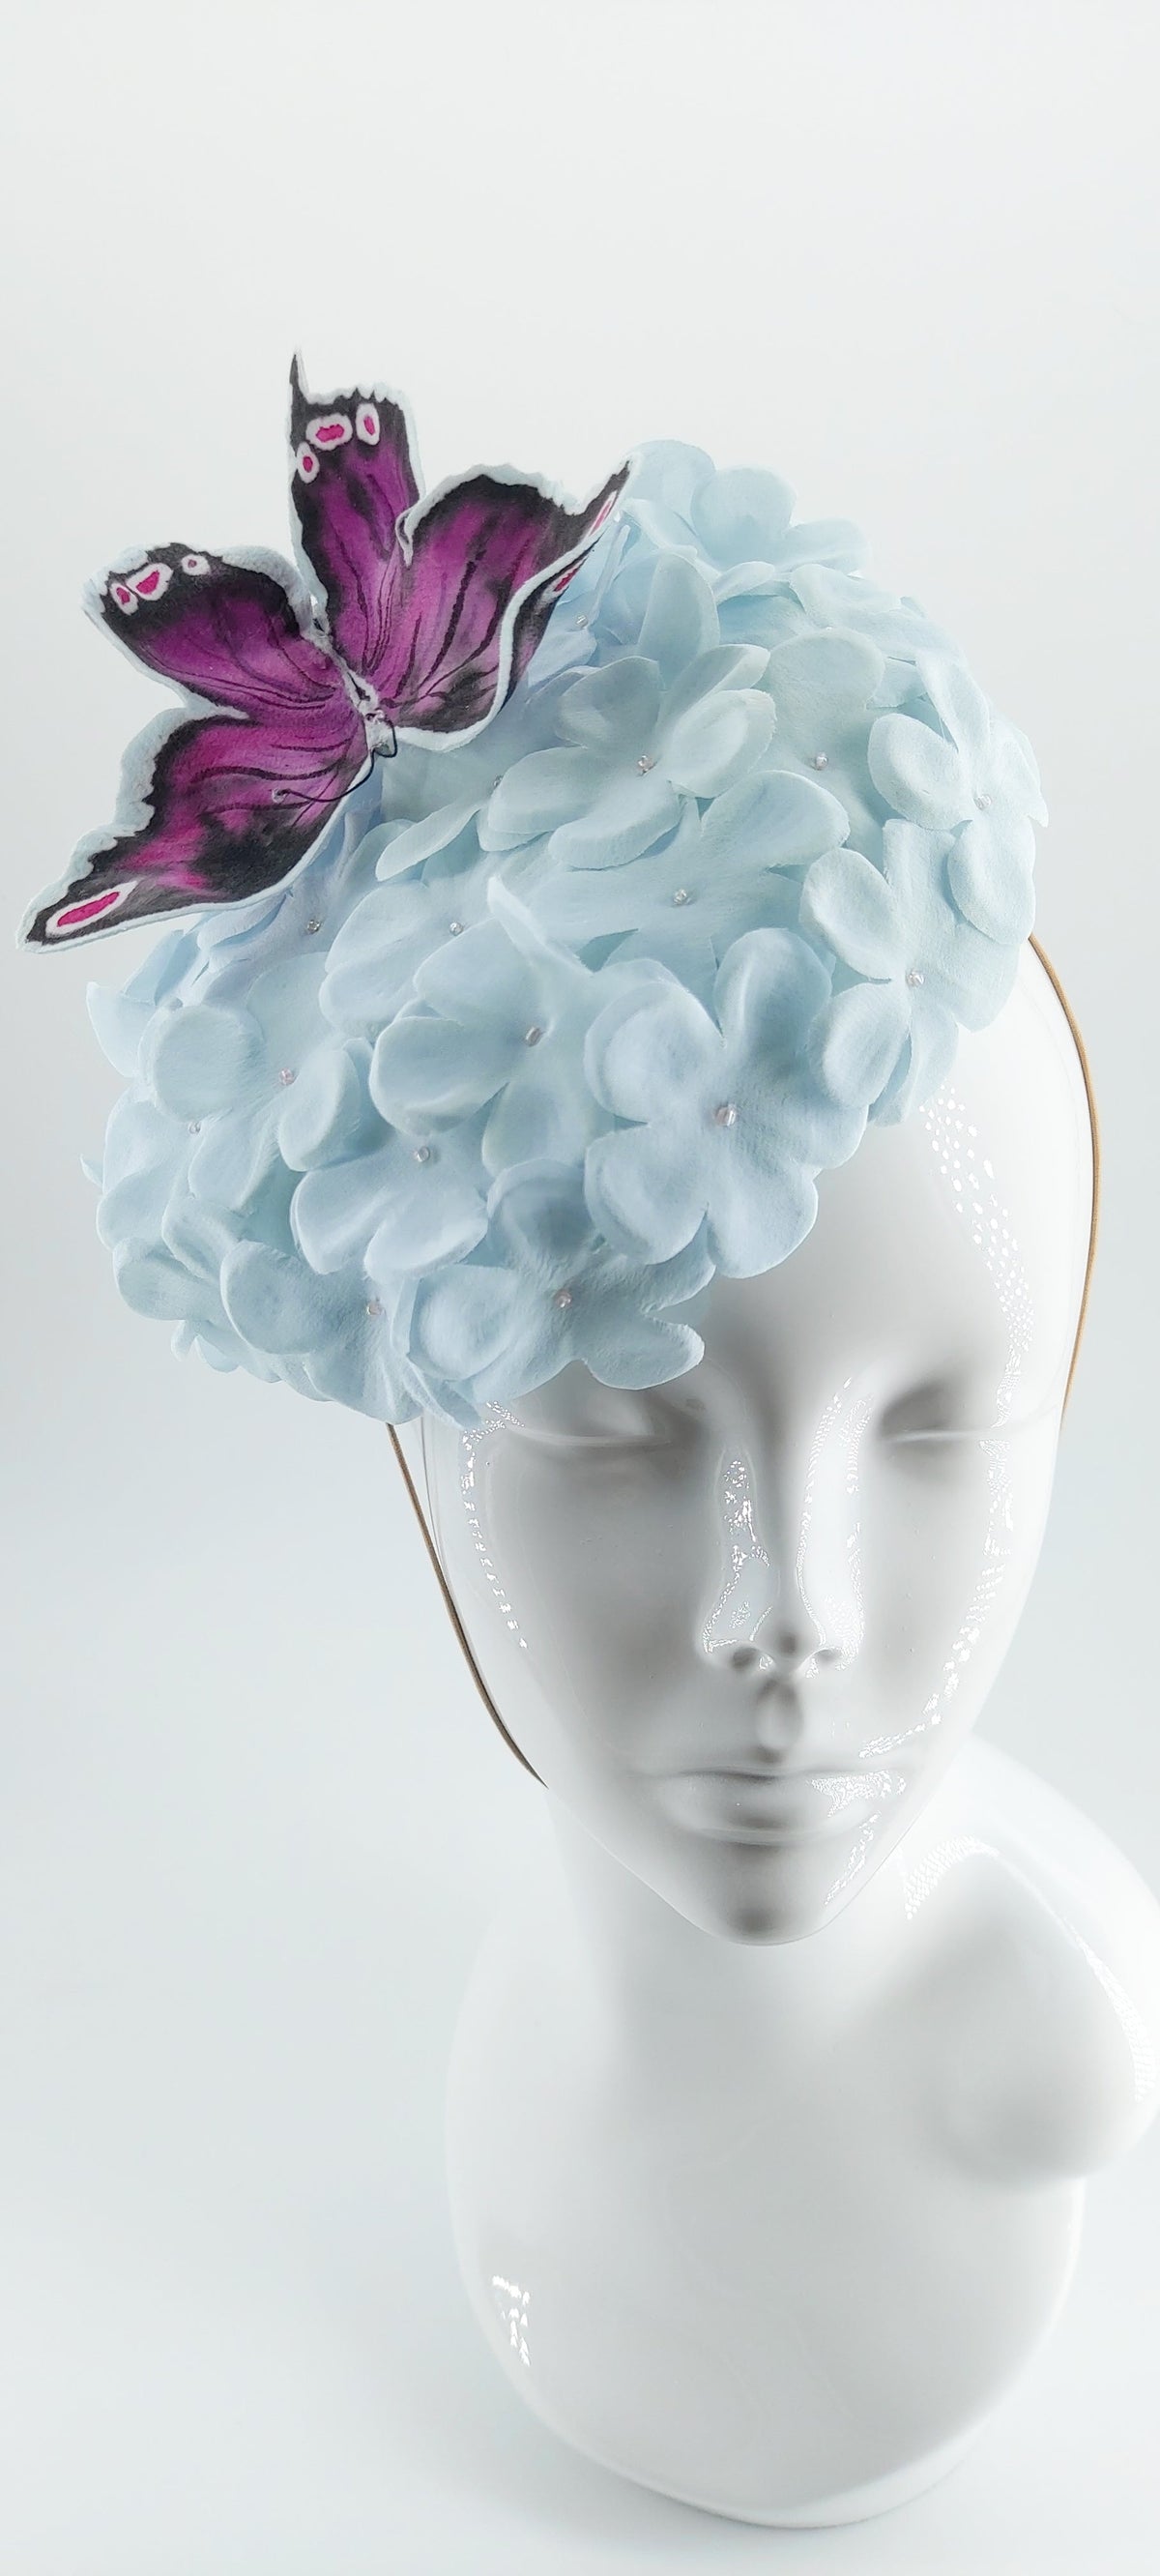 After The Rain: Couture Hat/Fascinator